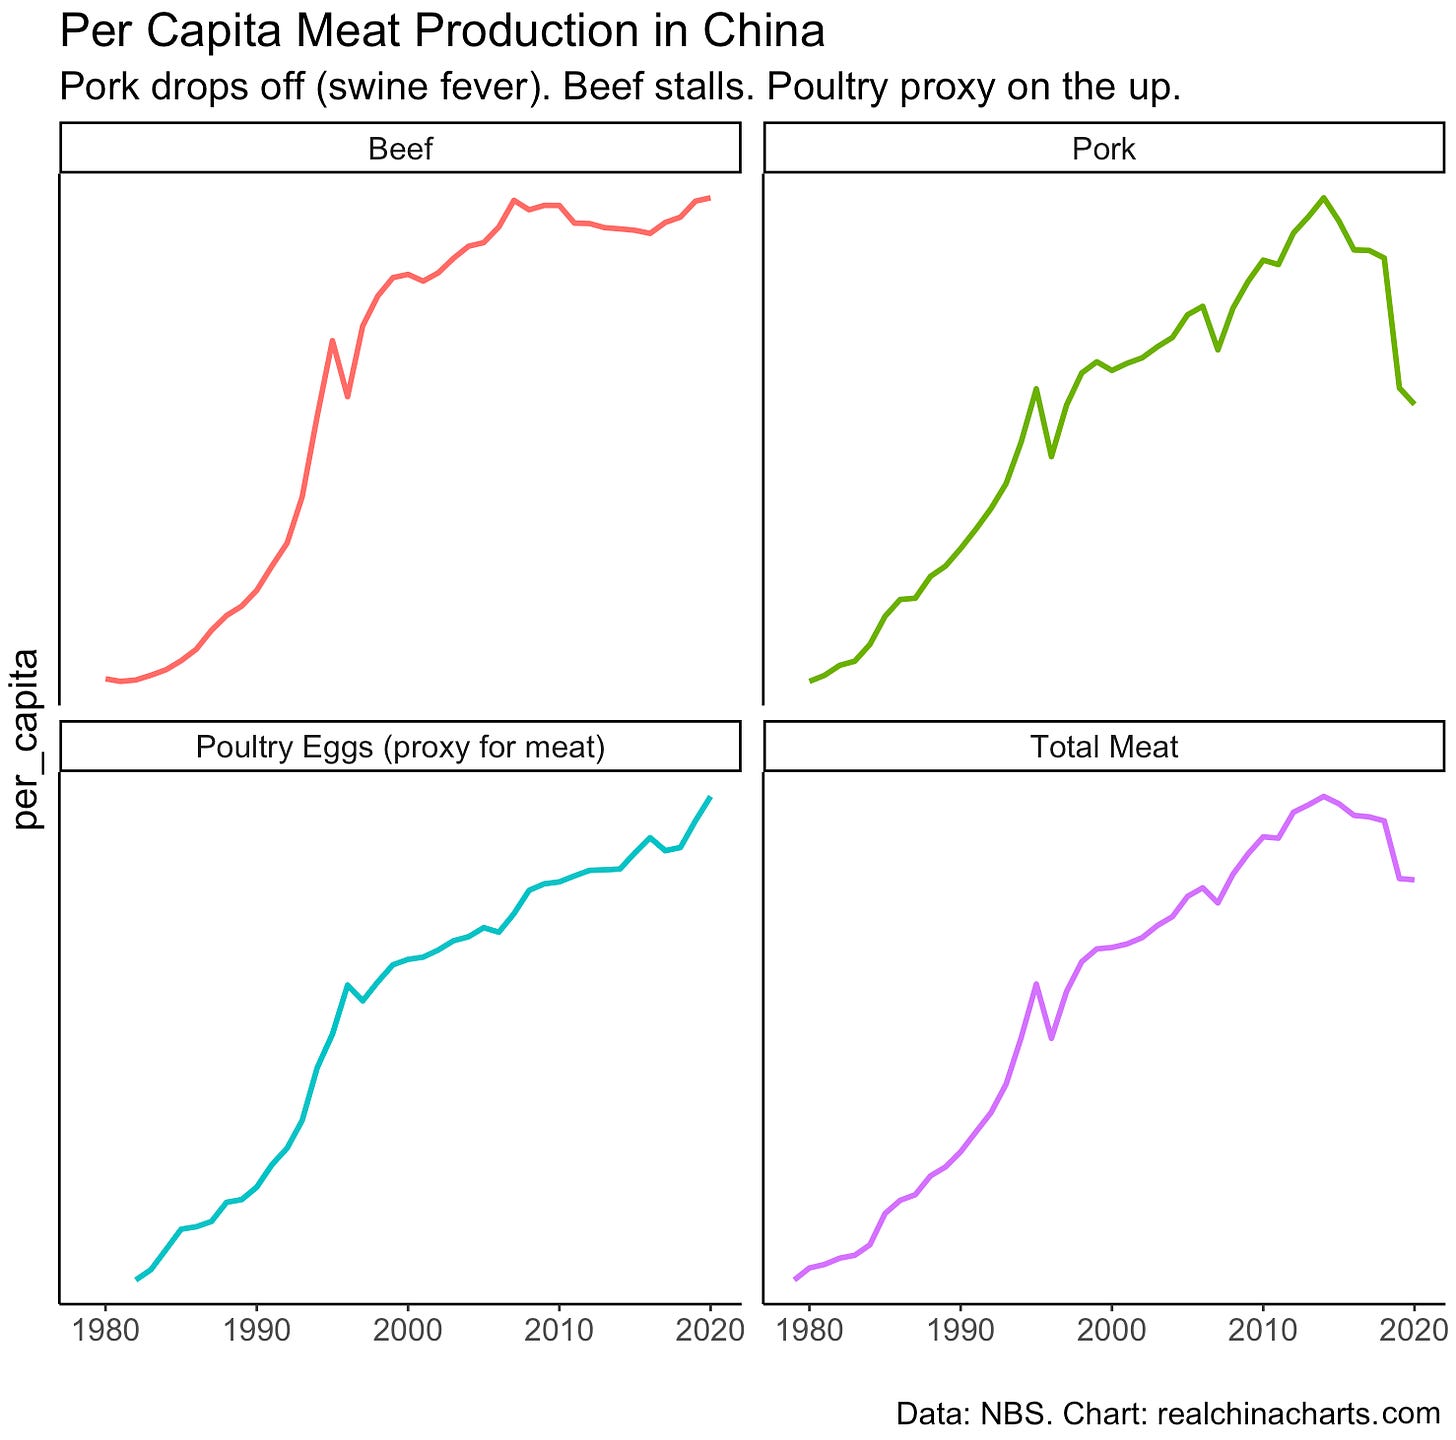 Per capita meat production in China